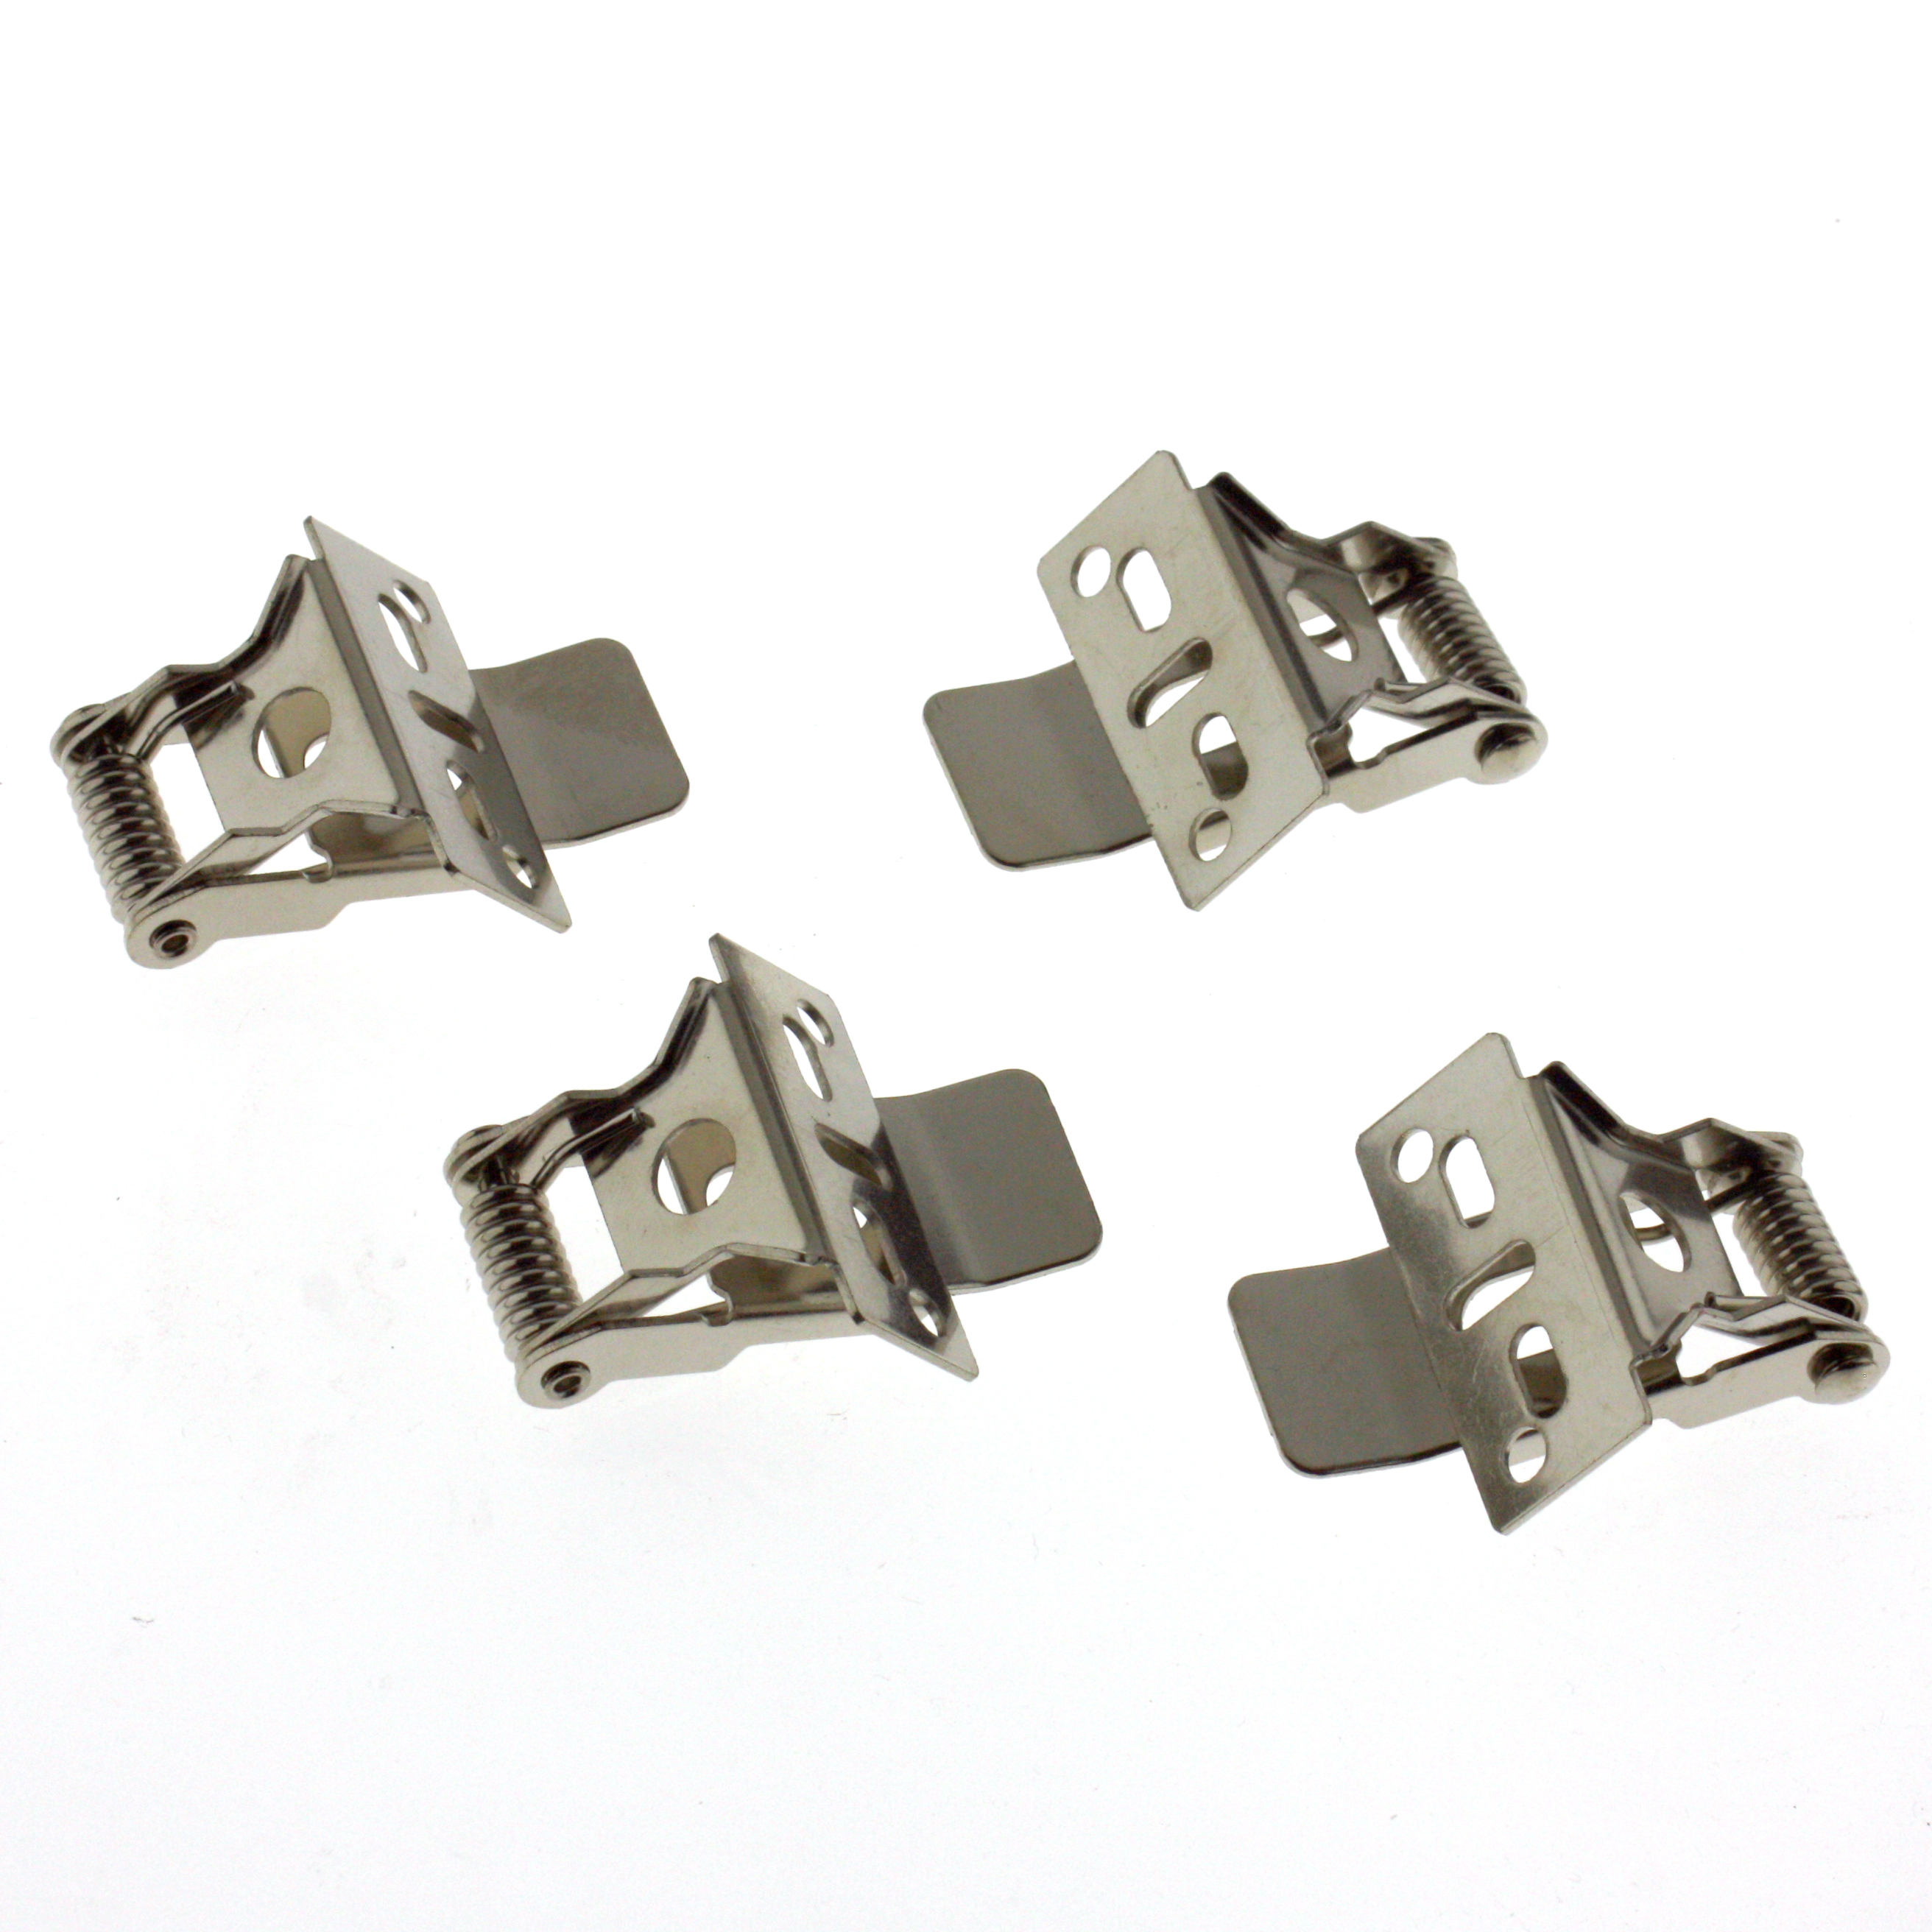 Mounting Clips for LED panels